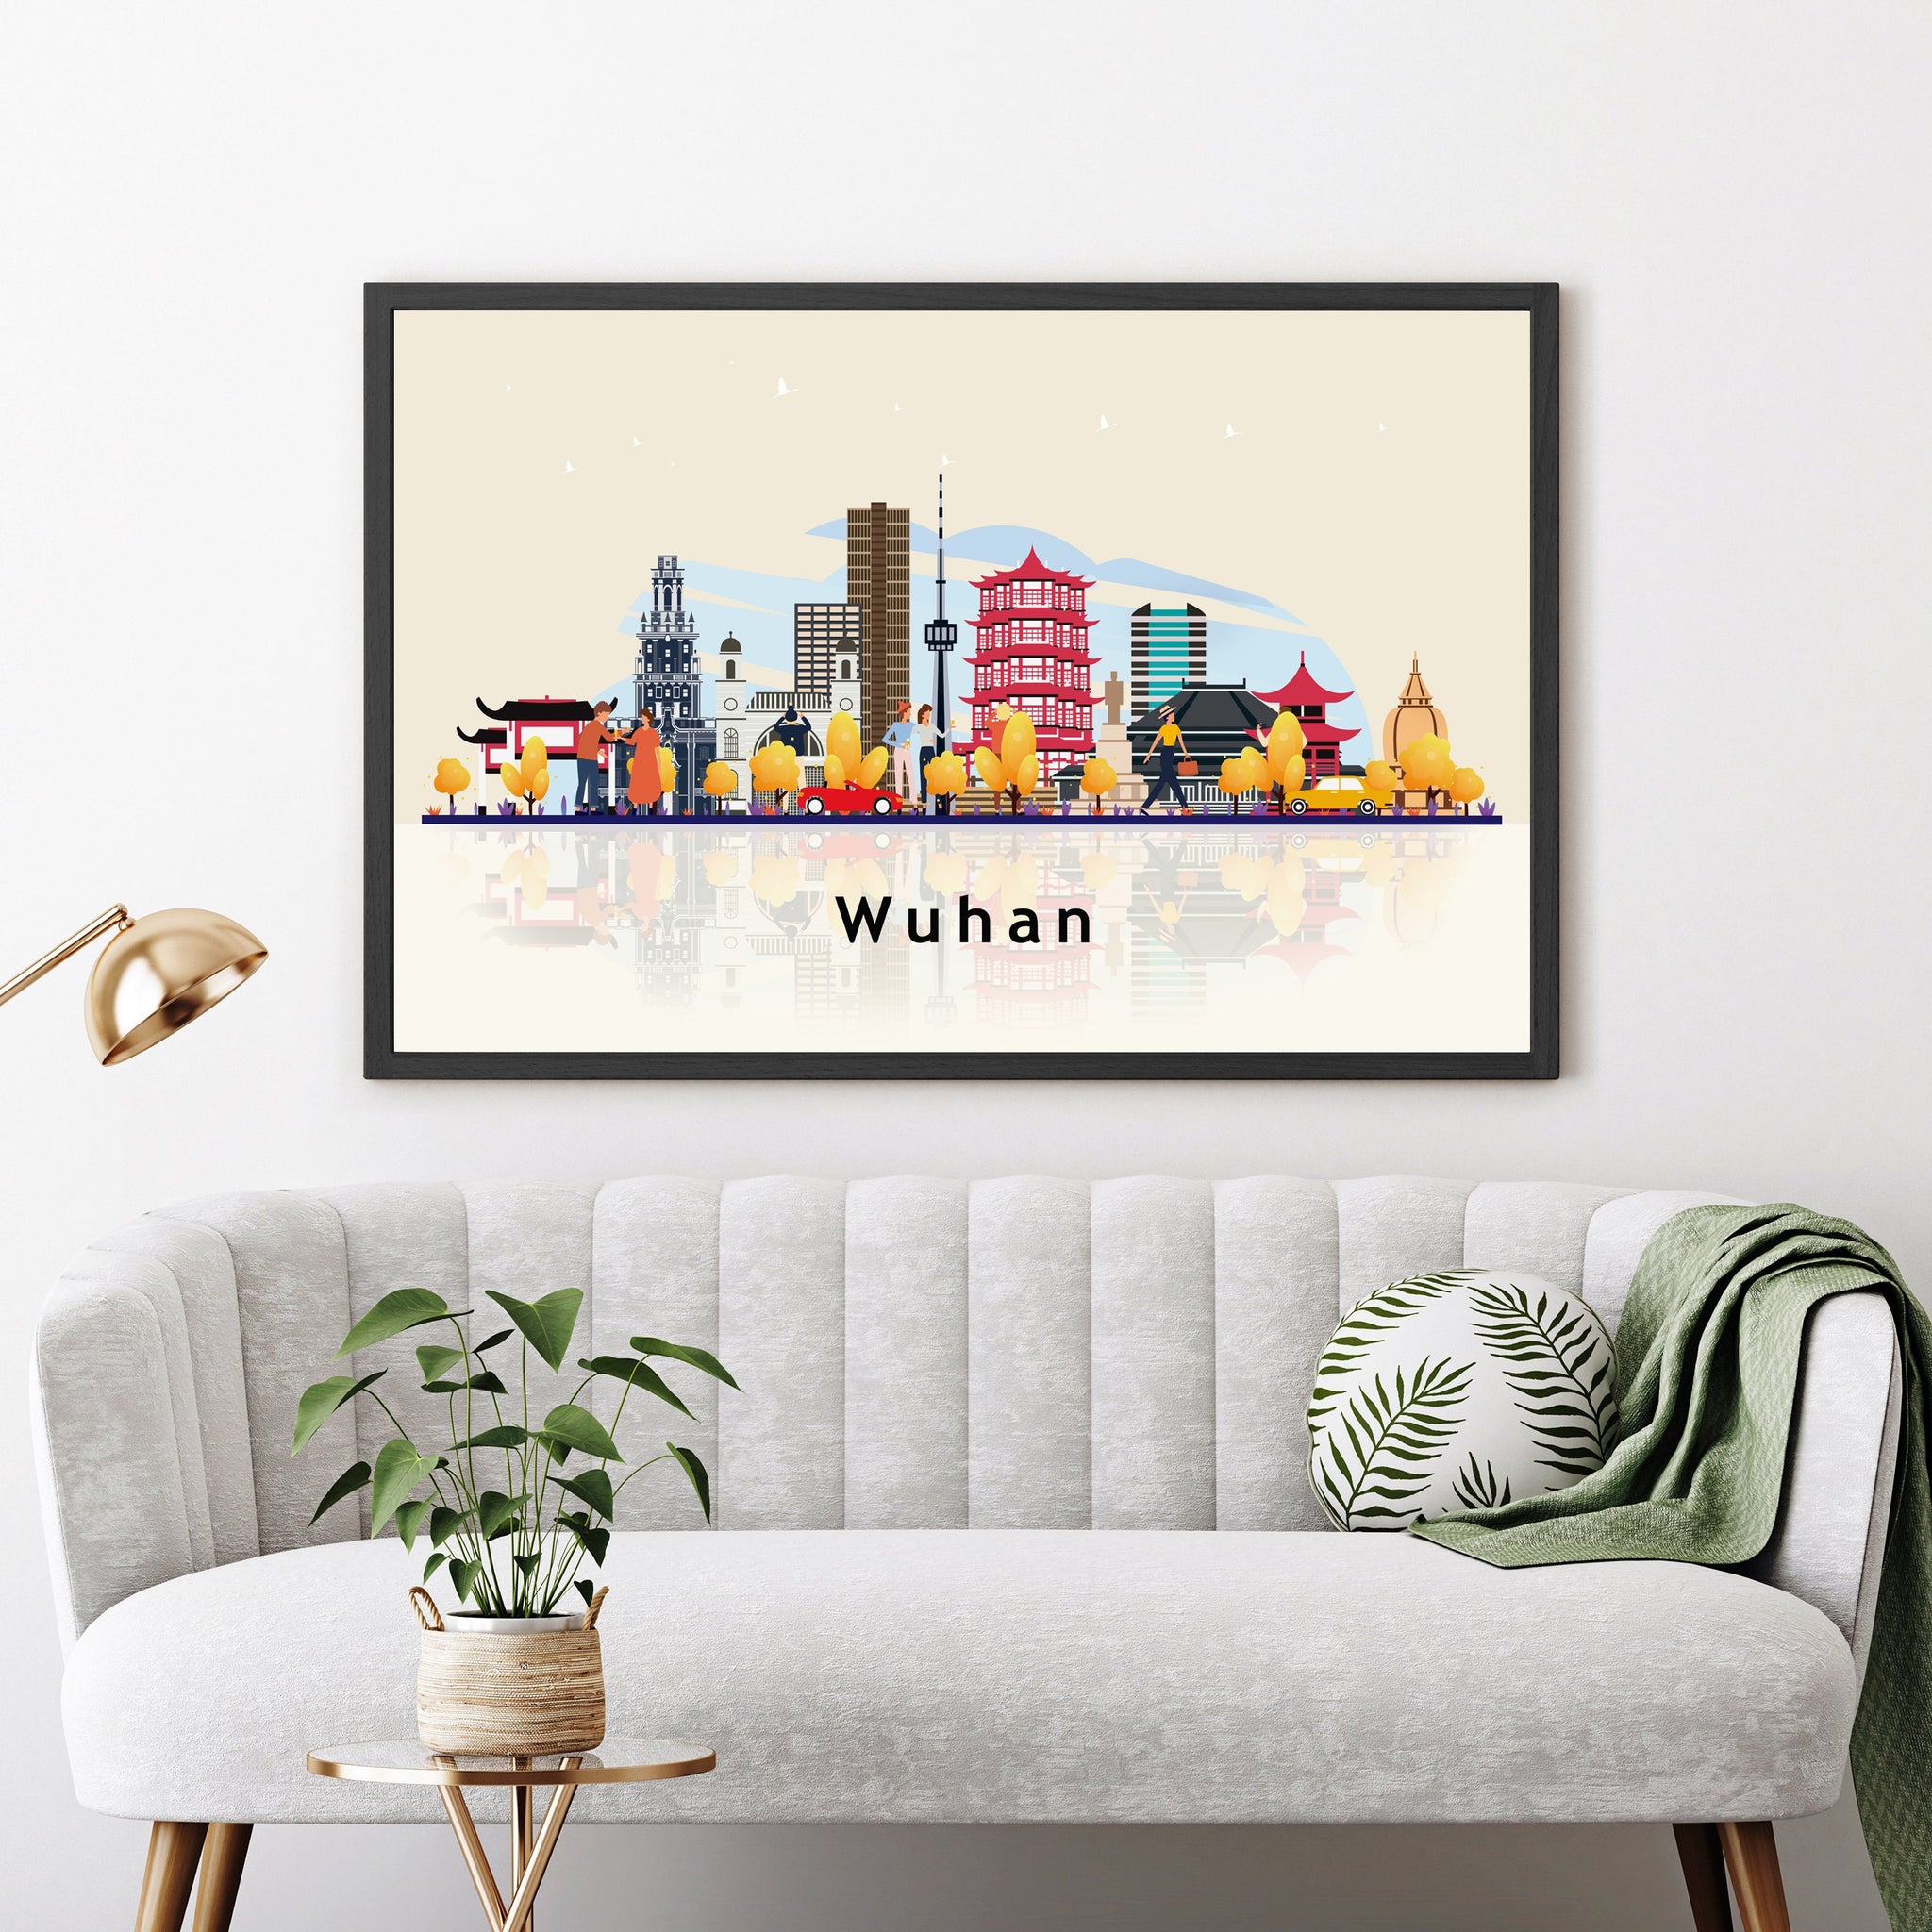 WUHAN CHINA Illustration skyline poster, Modern skyline cityscape poster, China city skyline landmark map poster, Home wall decoration